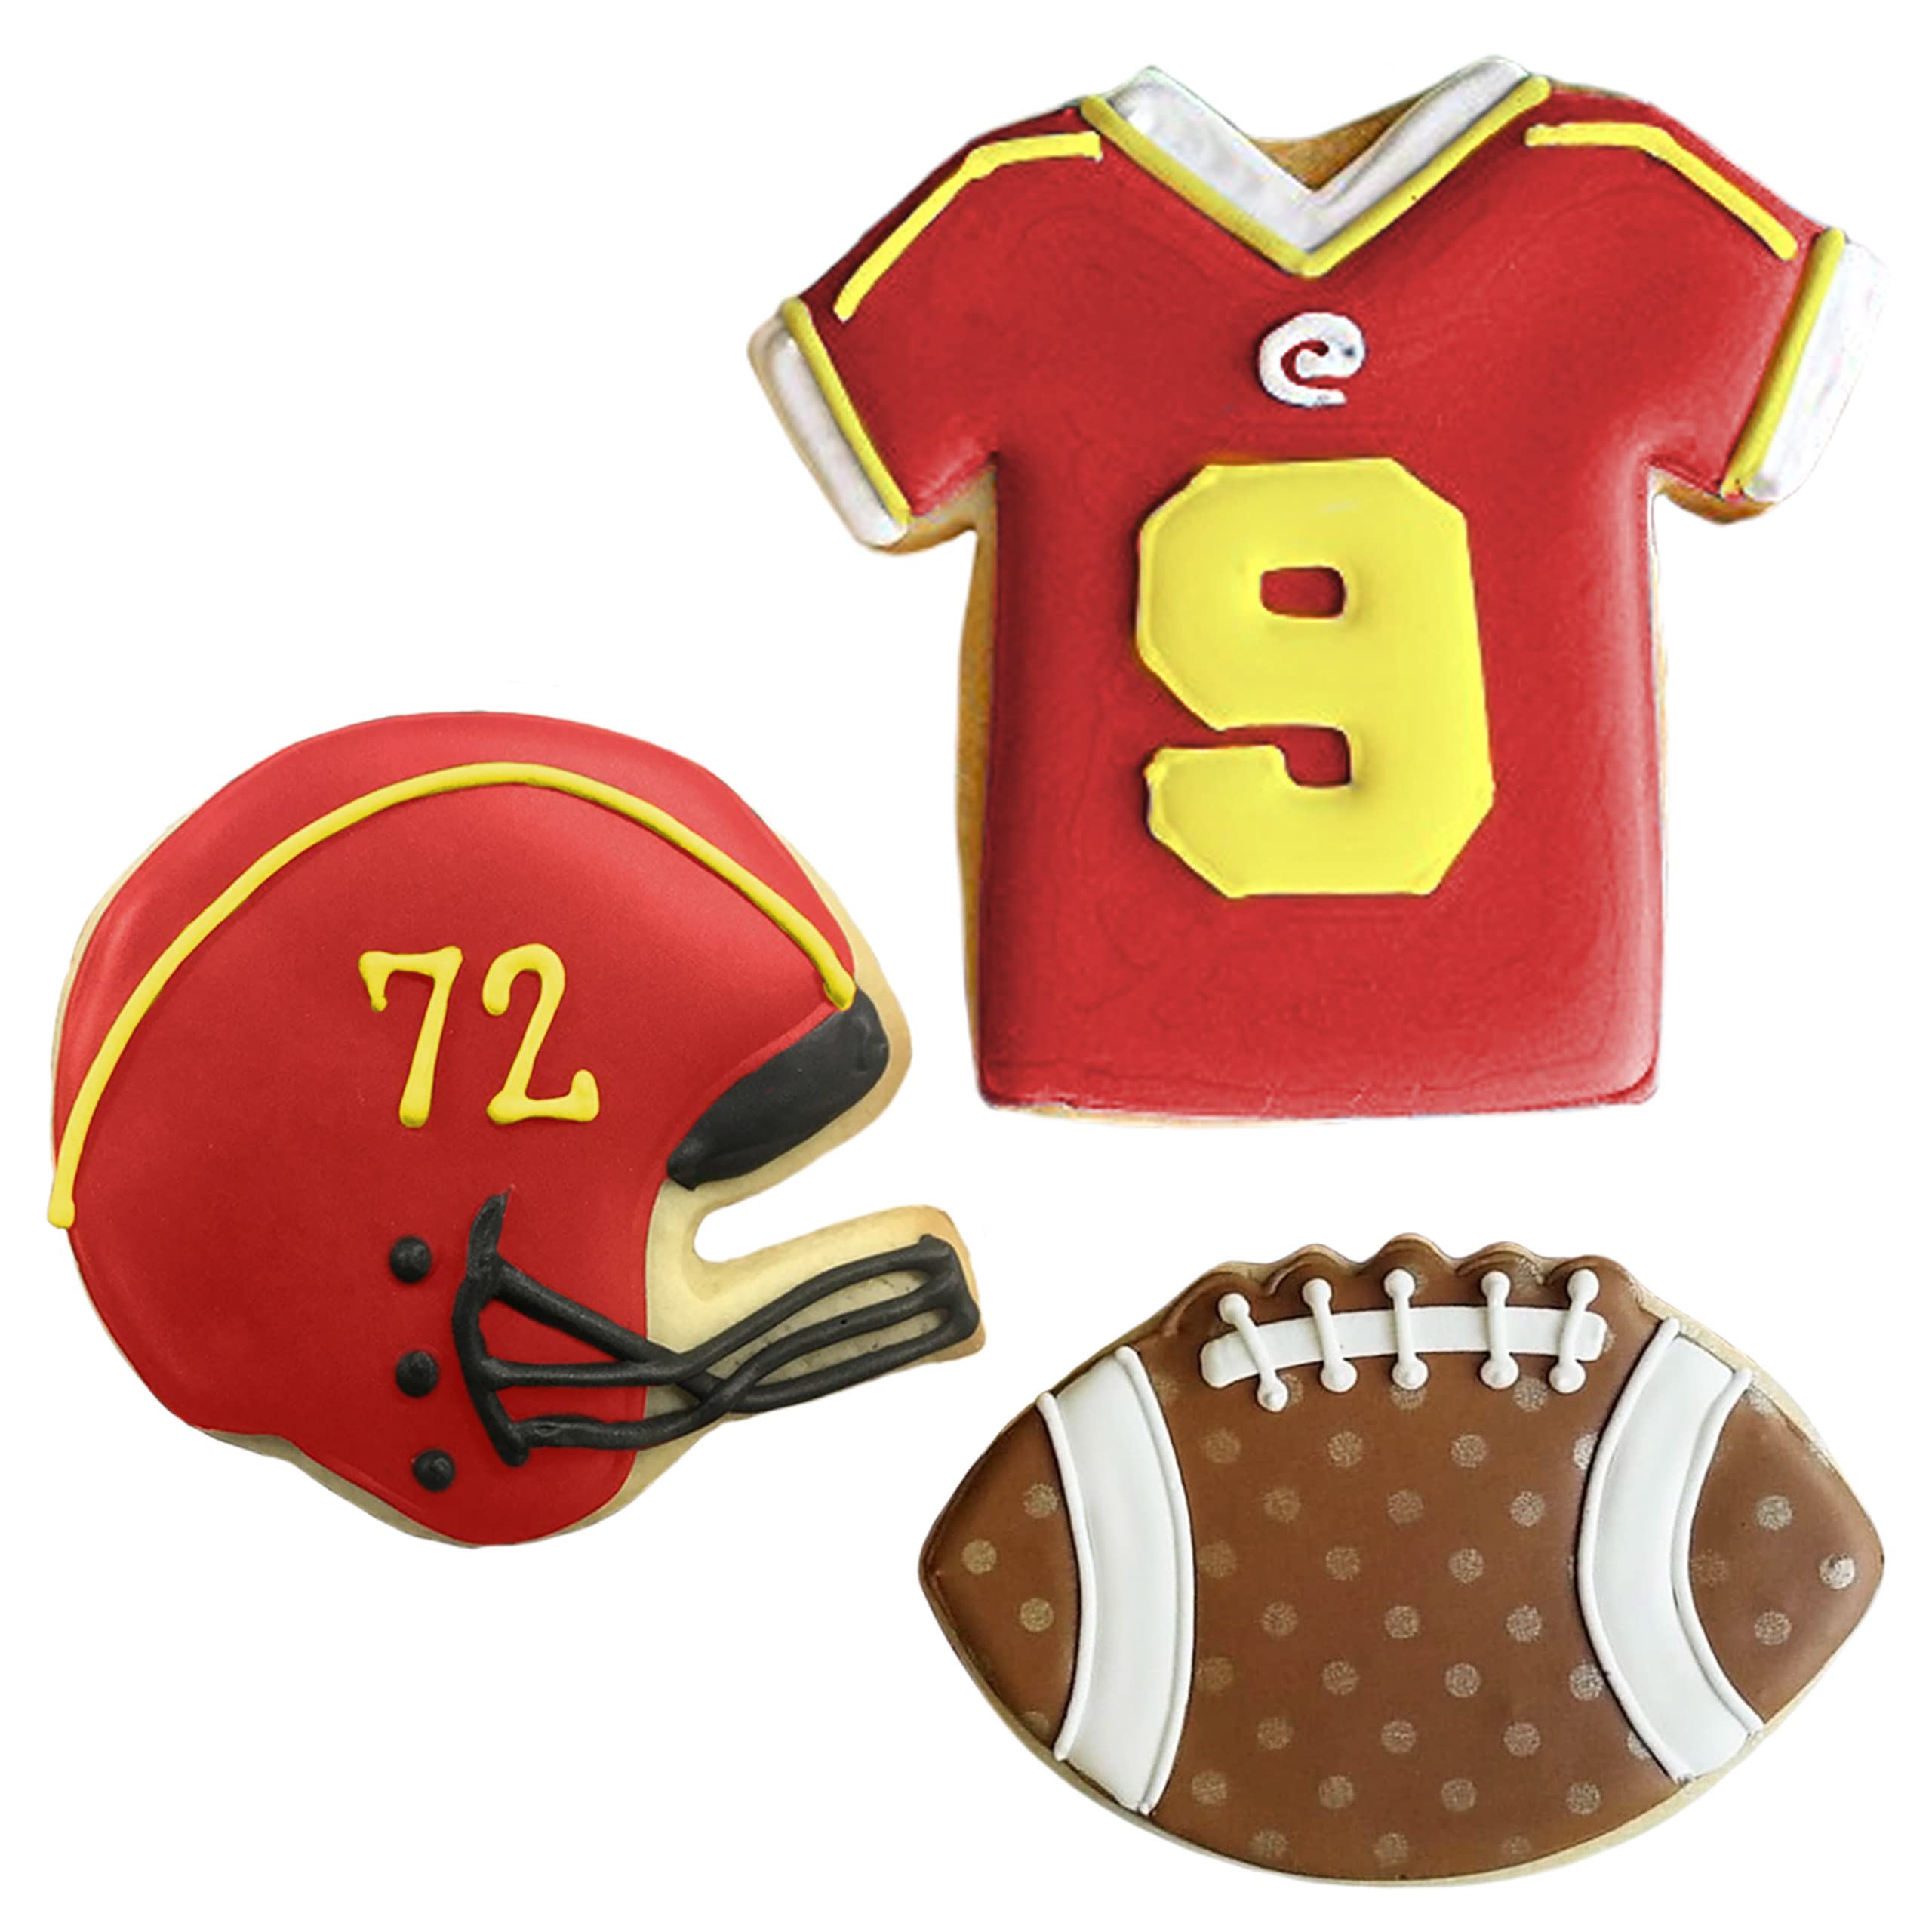 Football Cookie Cutters 3-Pc Set Made in the USA by Ann Clark, Football, Helmet, Jersey